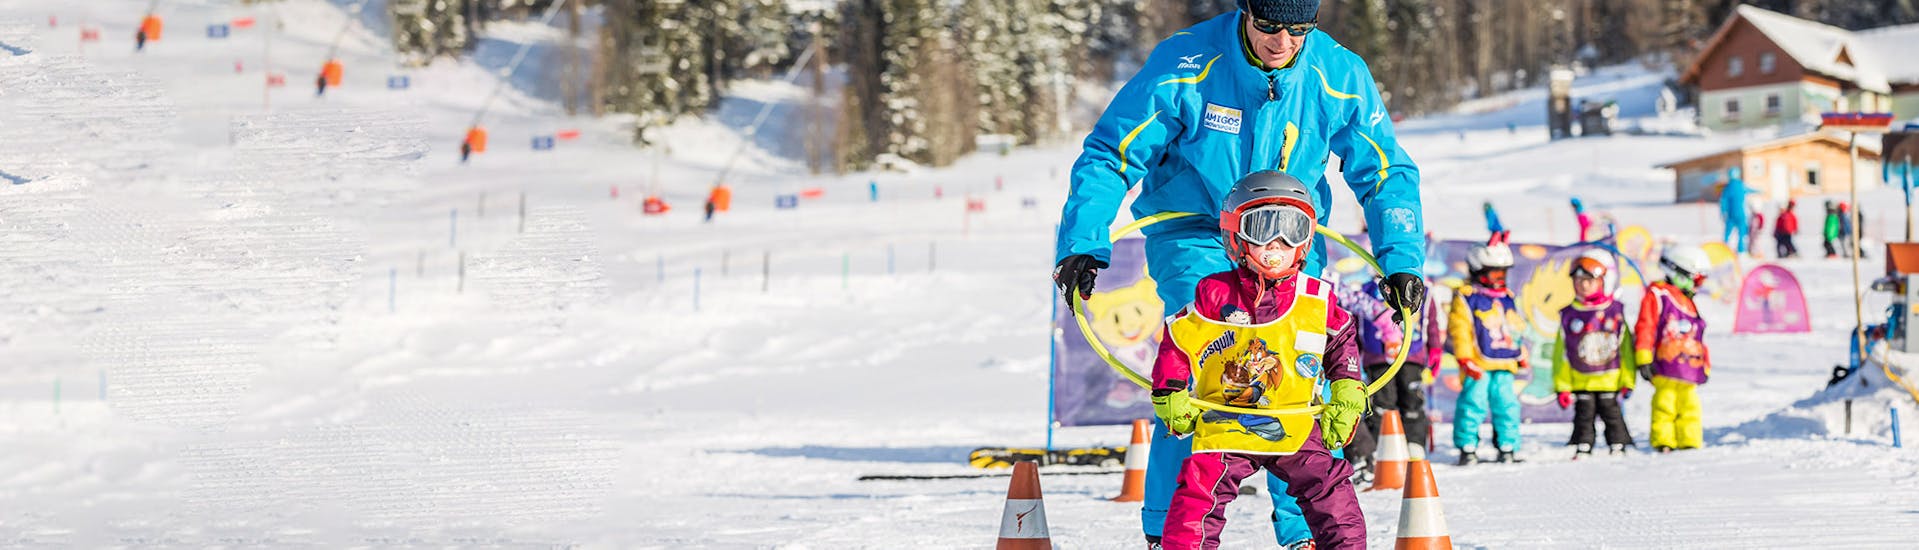 Kids Ski Lessons "Bambini" (from 3-5 y.) for First Timers.